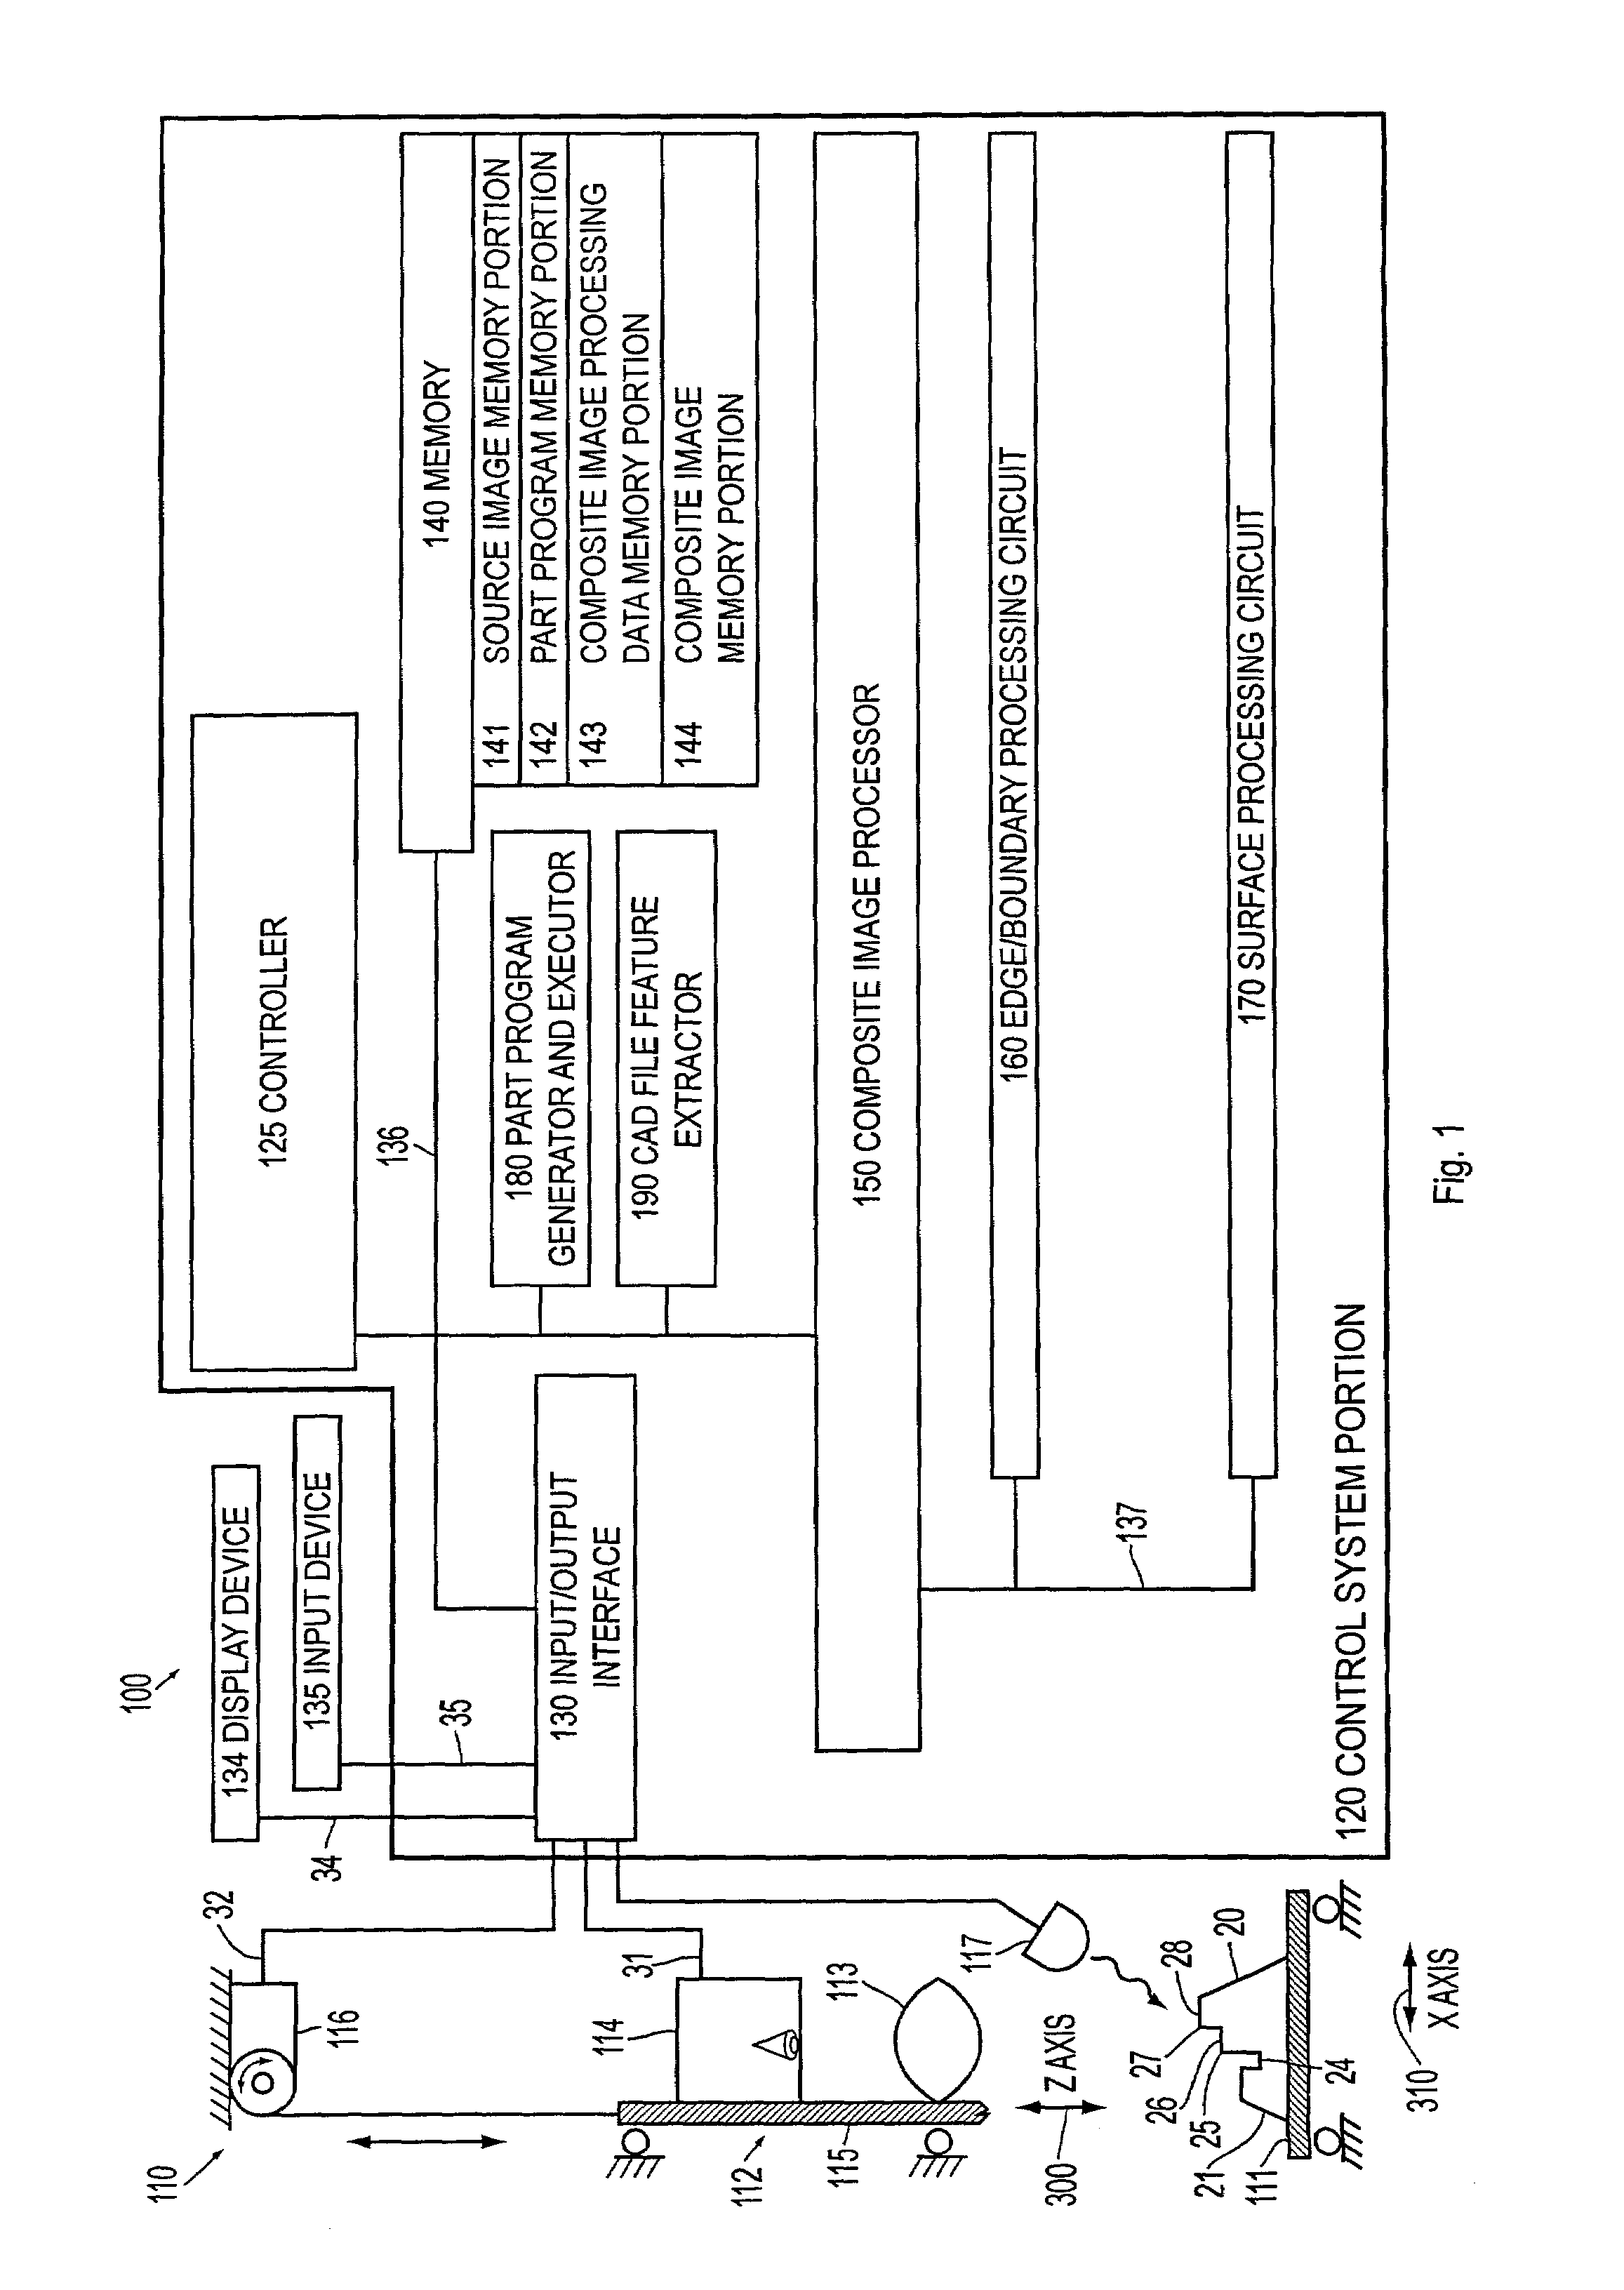 Systems and methods for constructing an image having an extended depth of field